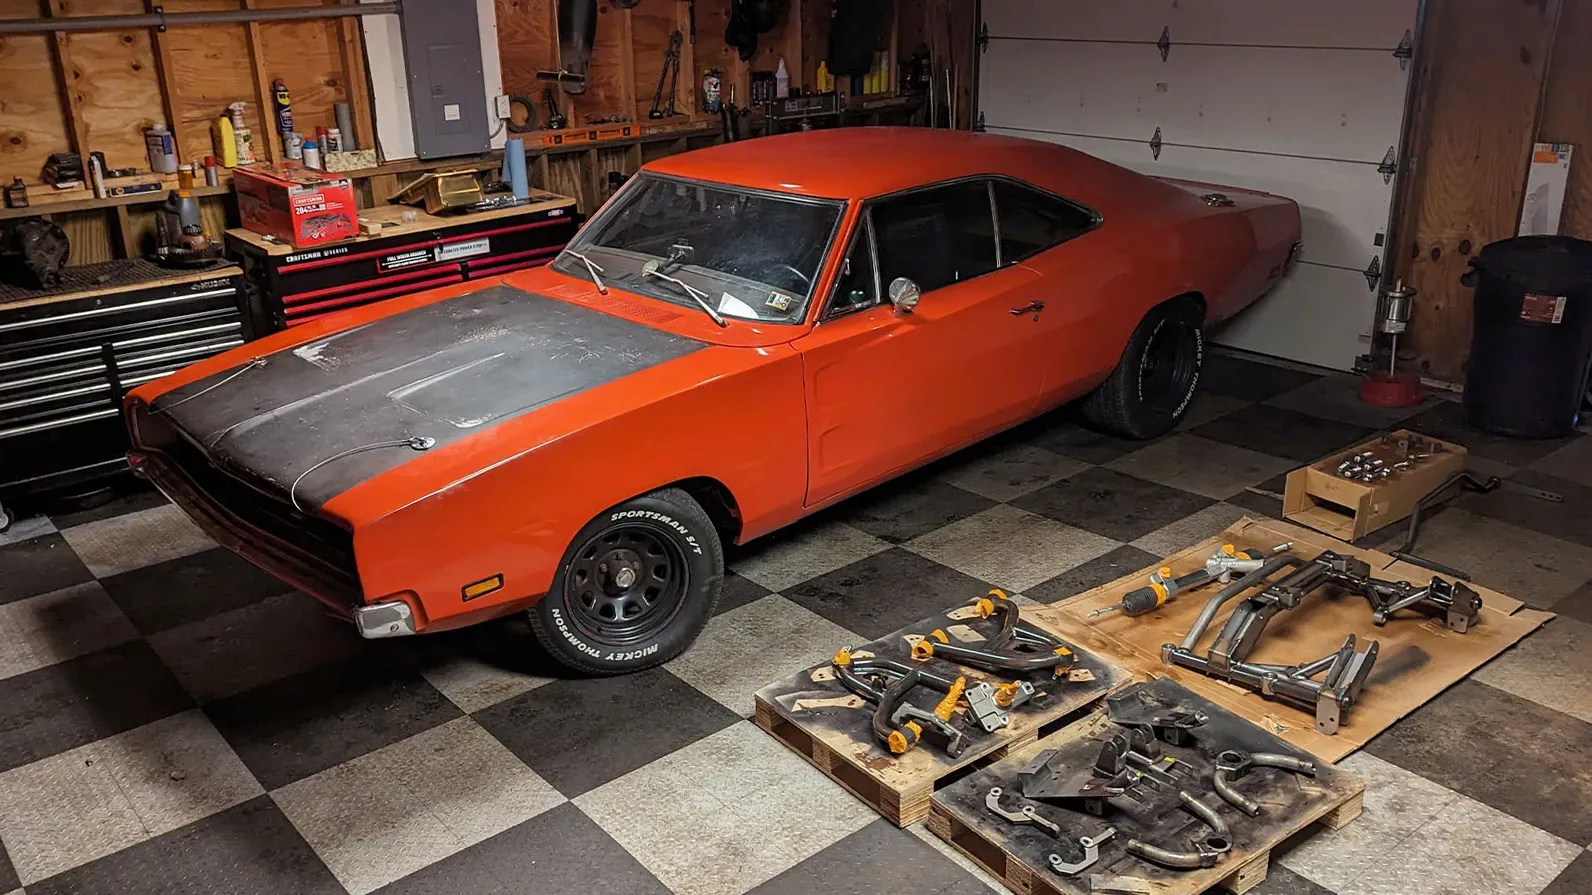 Hank O'Hop's 1969 Dodge Charger project